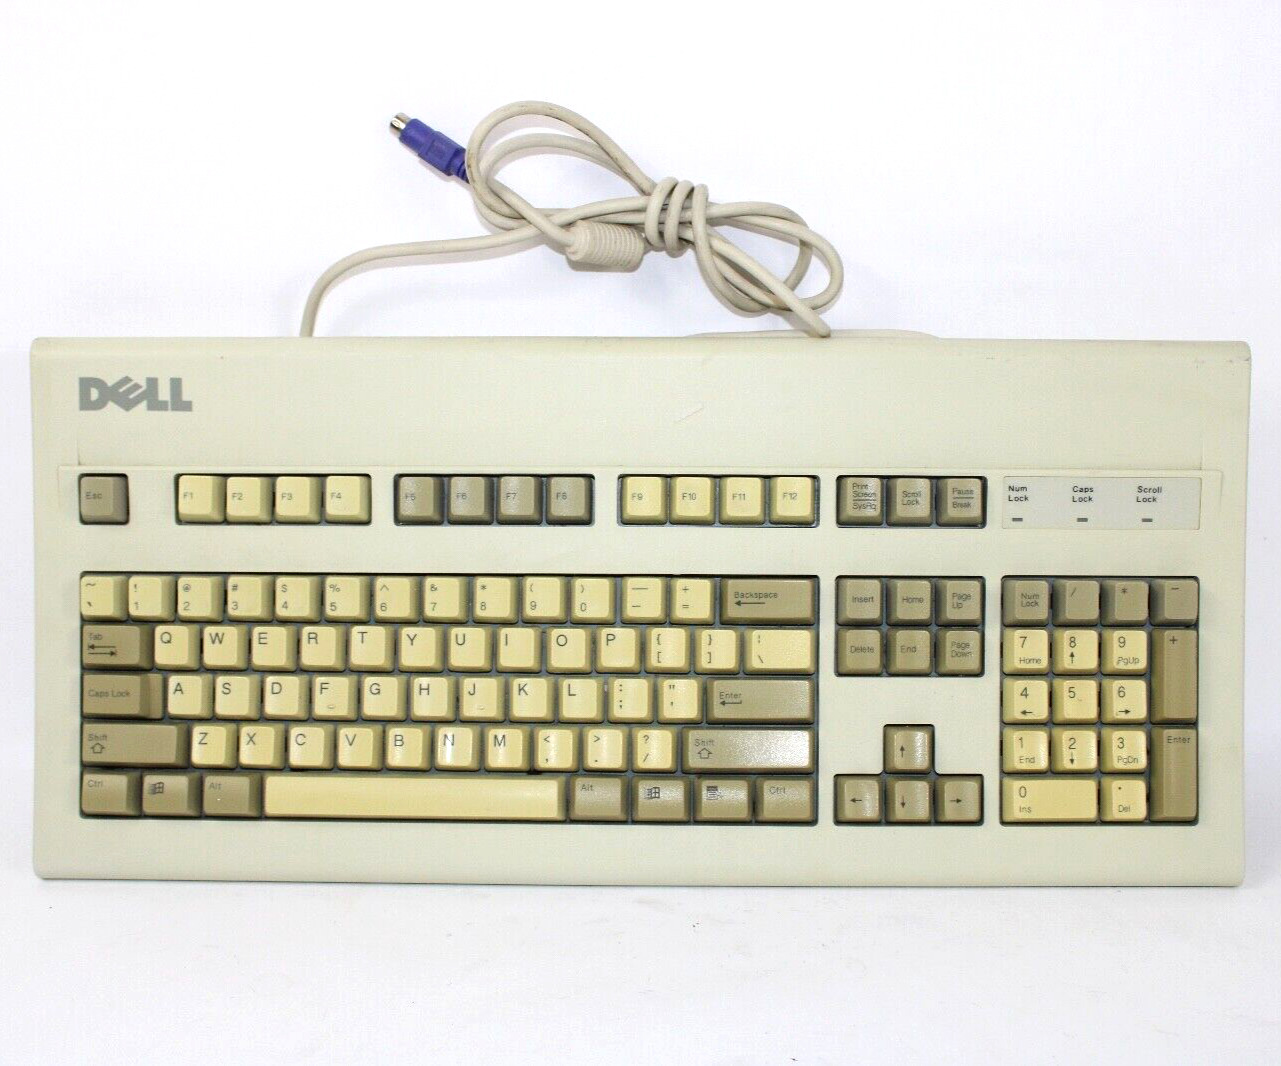 DELL AT101W Mechanical GYUM90SK Keyboard Alps Switches PS/2 Retro Working GUC